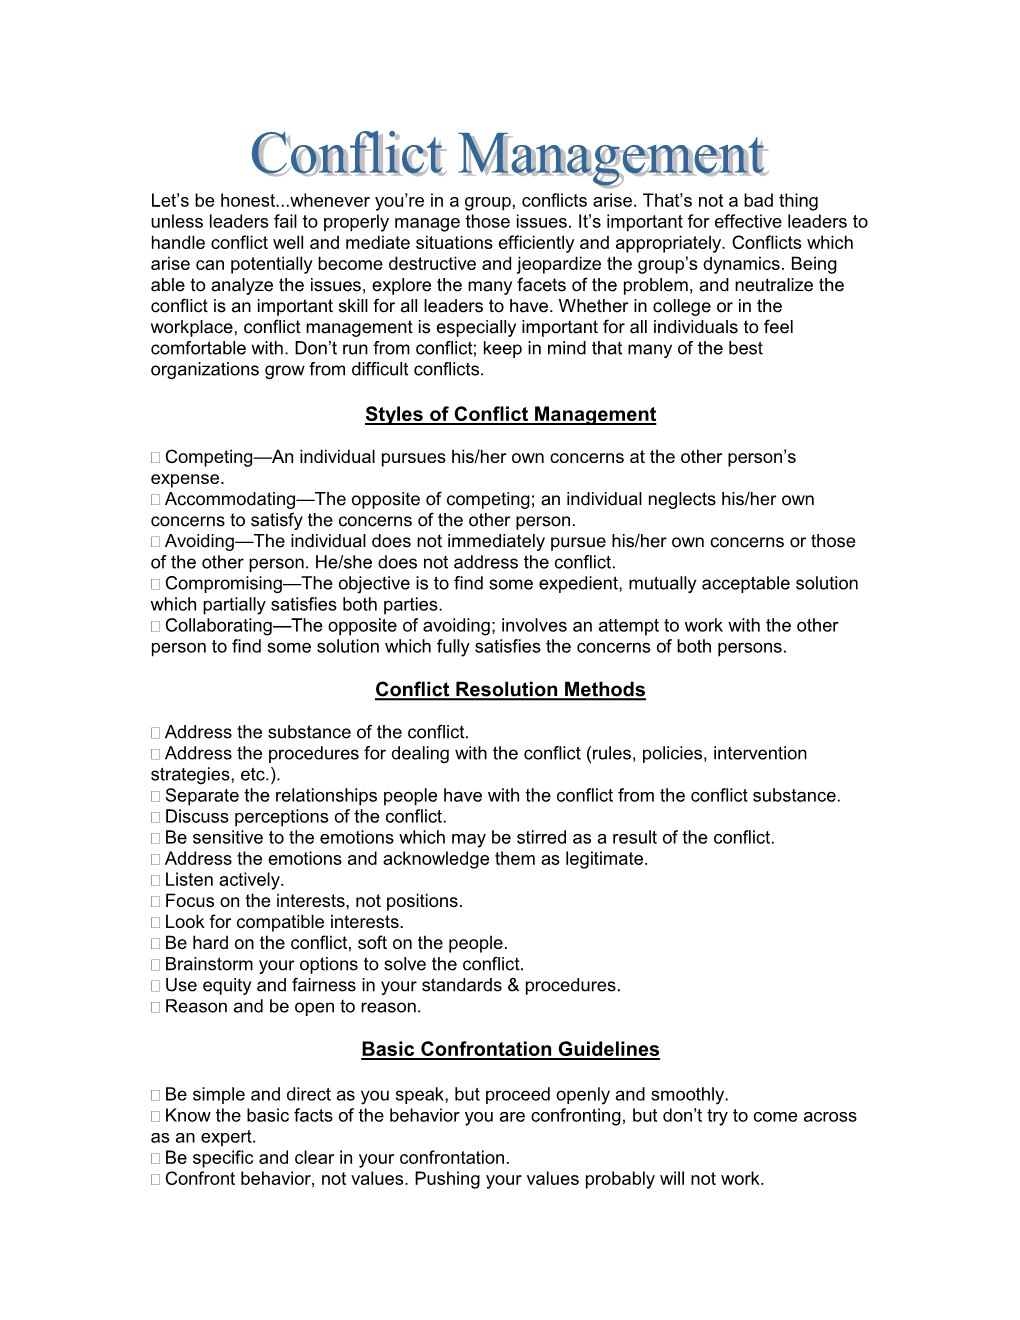 Conflict Management Is Especially Important for All Individuals to Feel Comfortable With